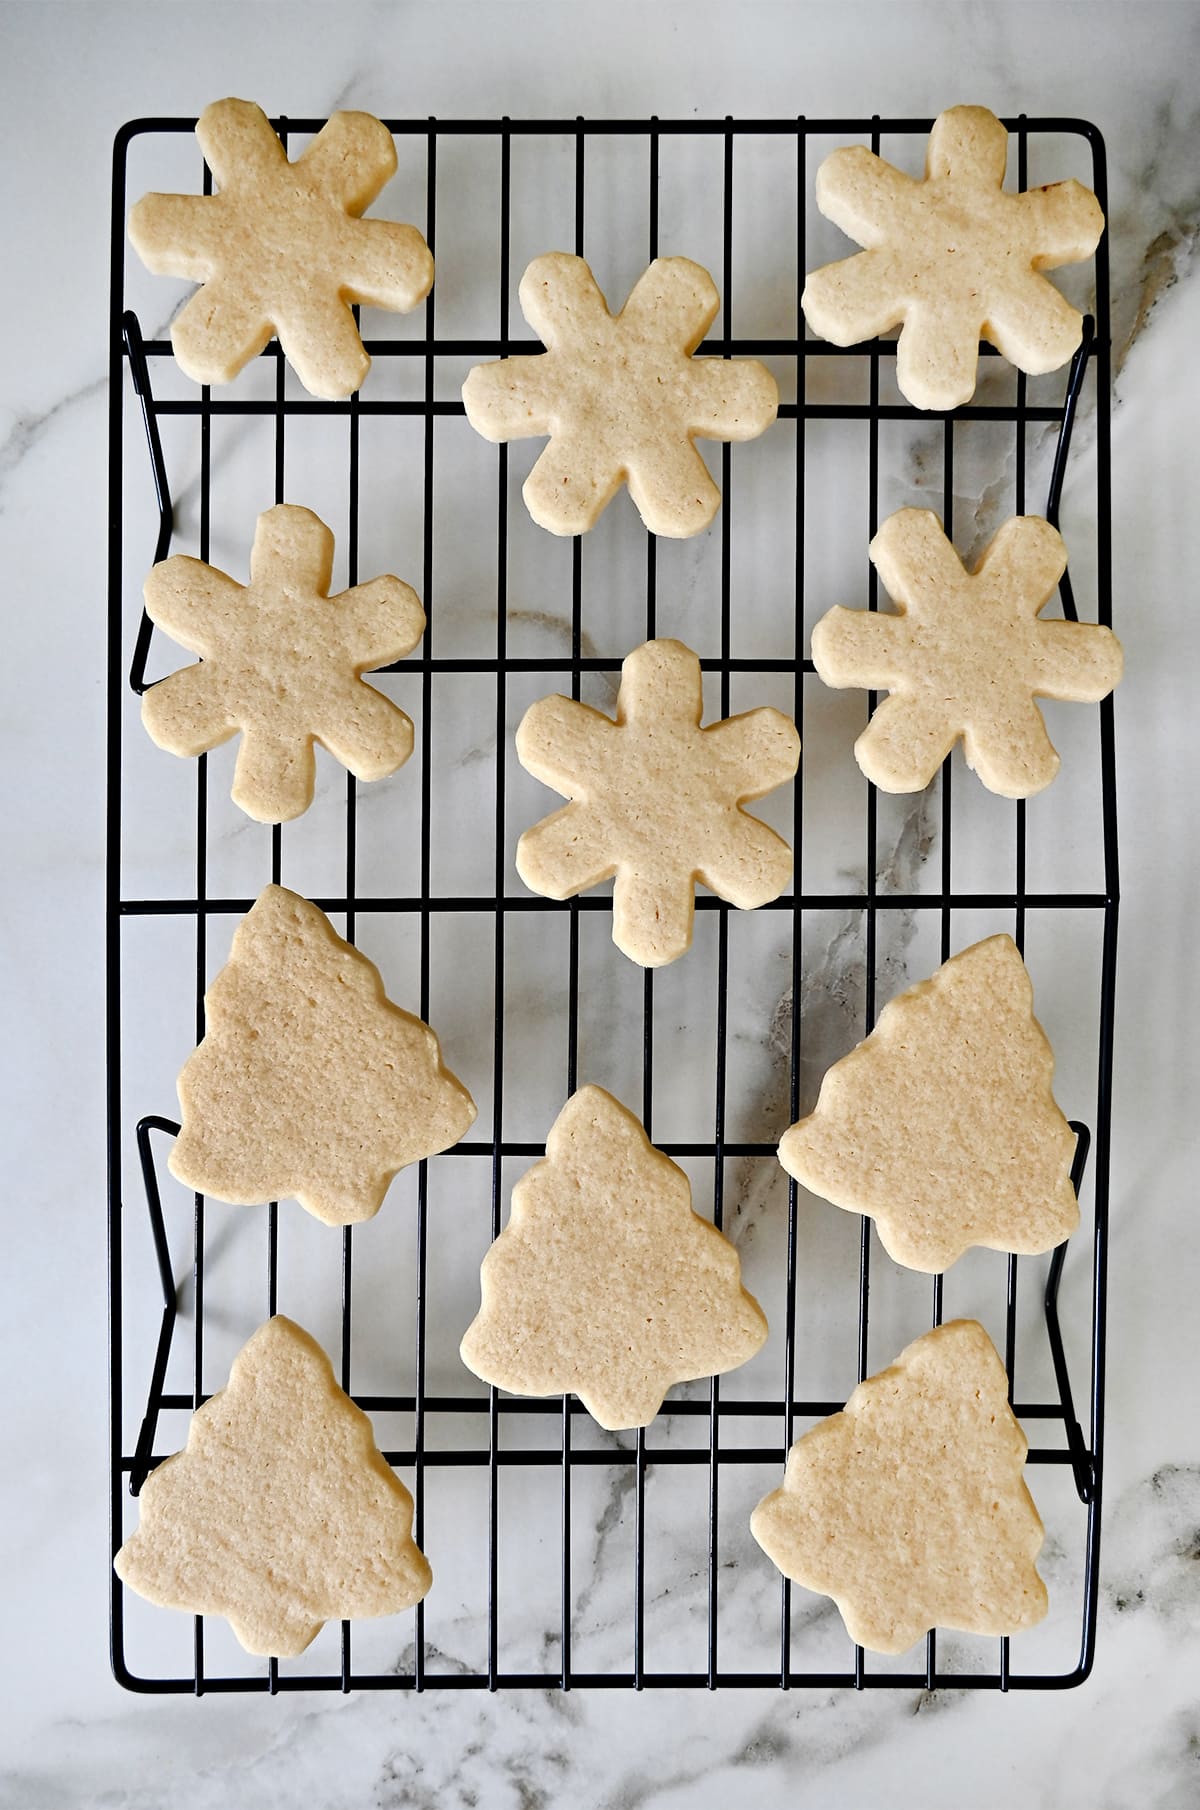 Sugar cookies in the shapes of Christmas trees and snowflakes cooling on a wire rack.